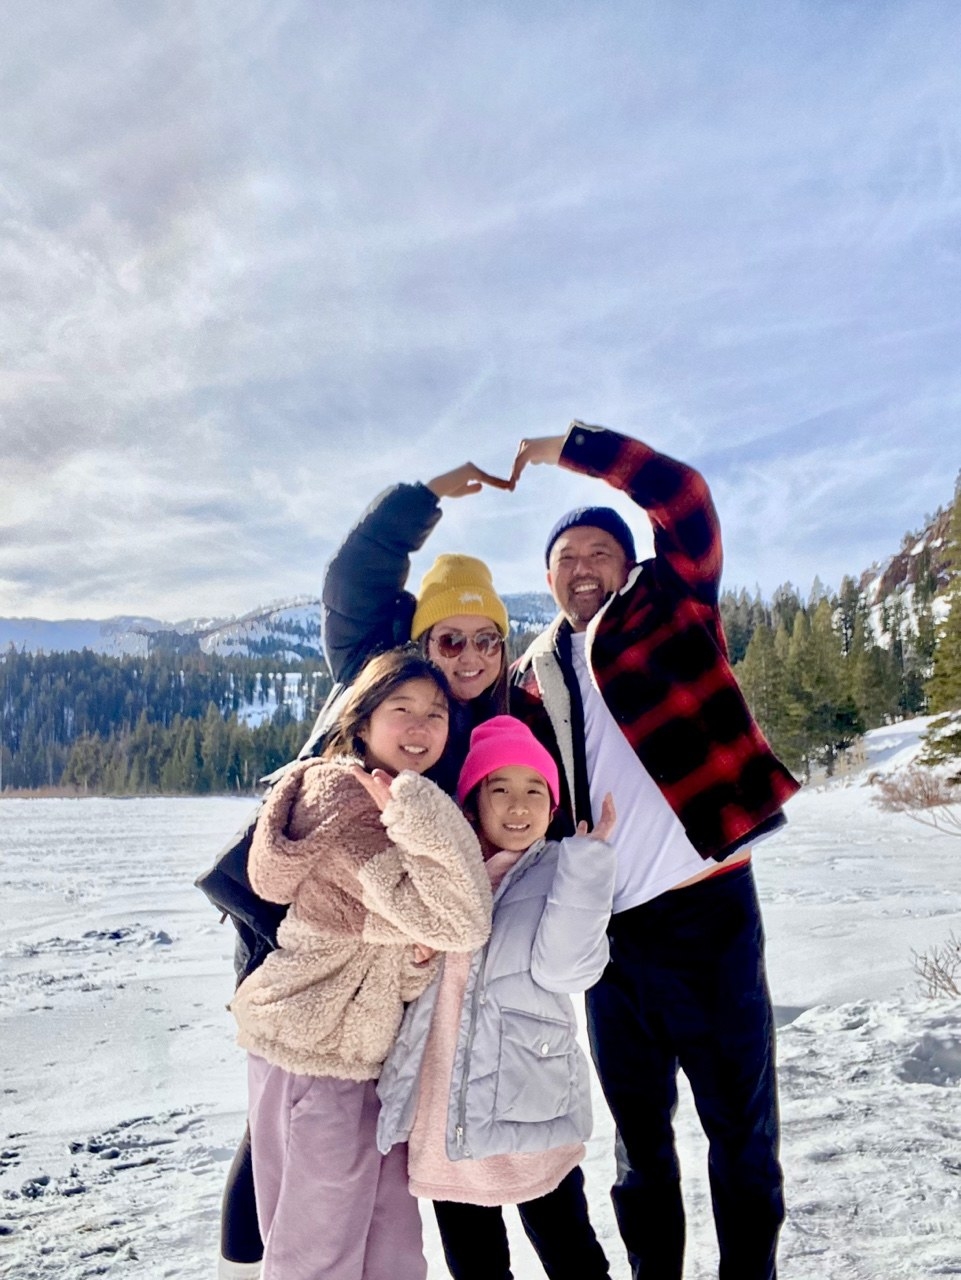 Family on a snowy mountain making a heart with their hands